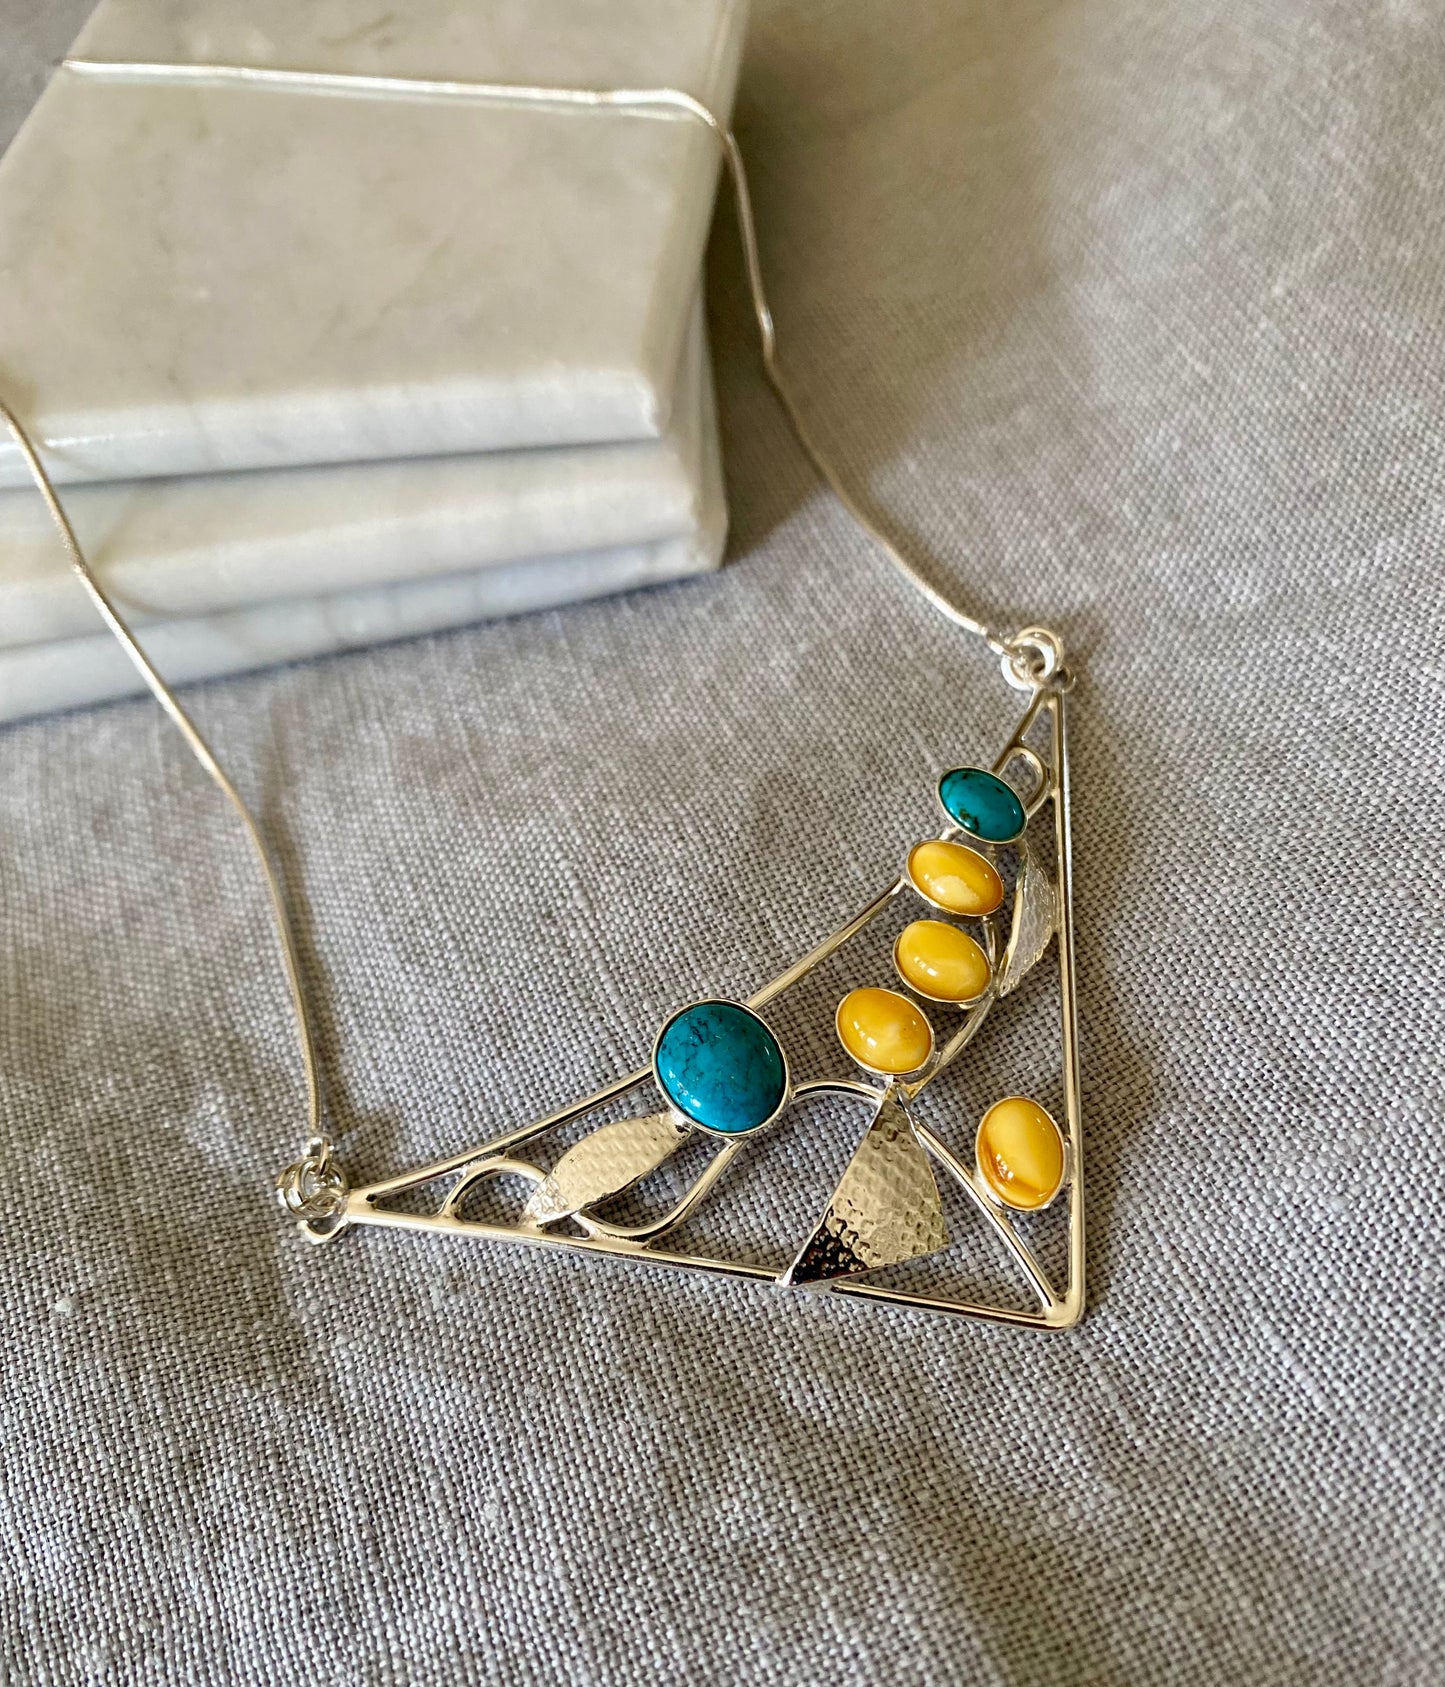 Amber & Turquoise Necklace